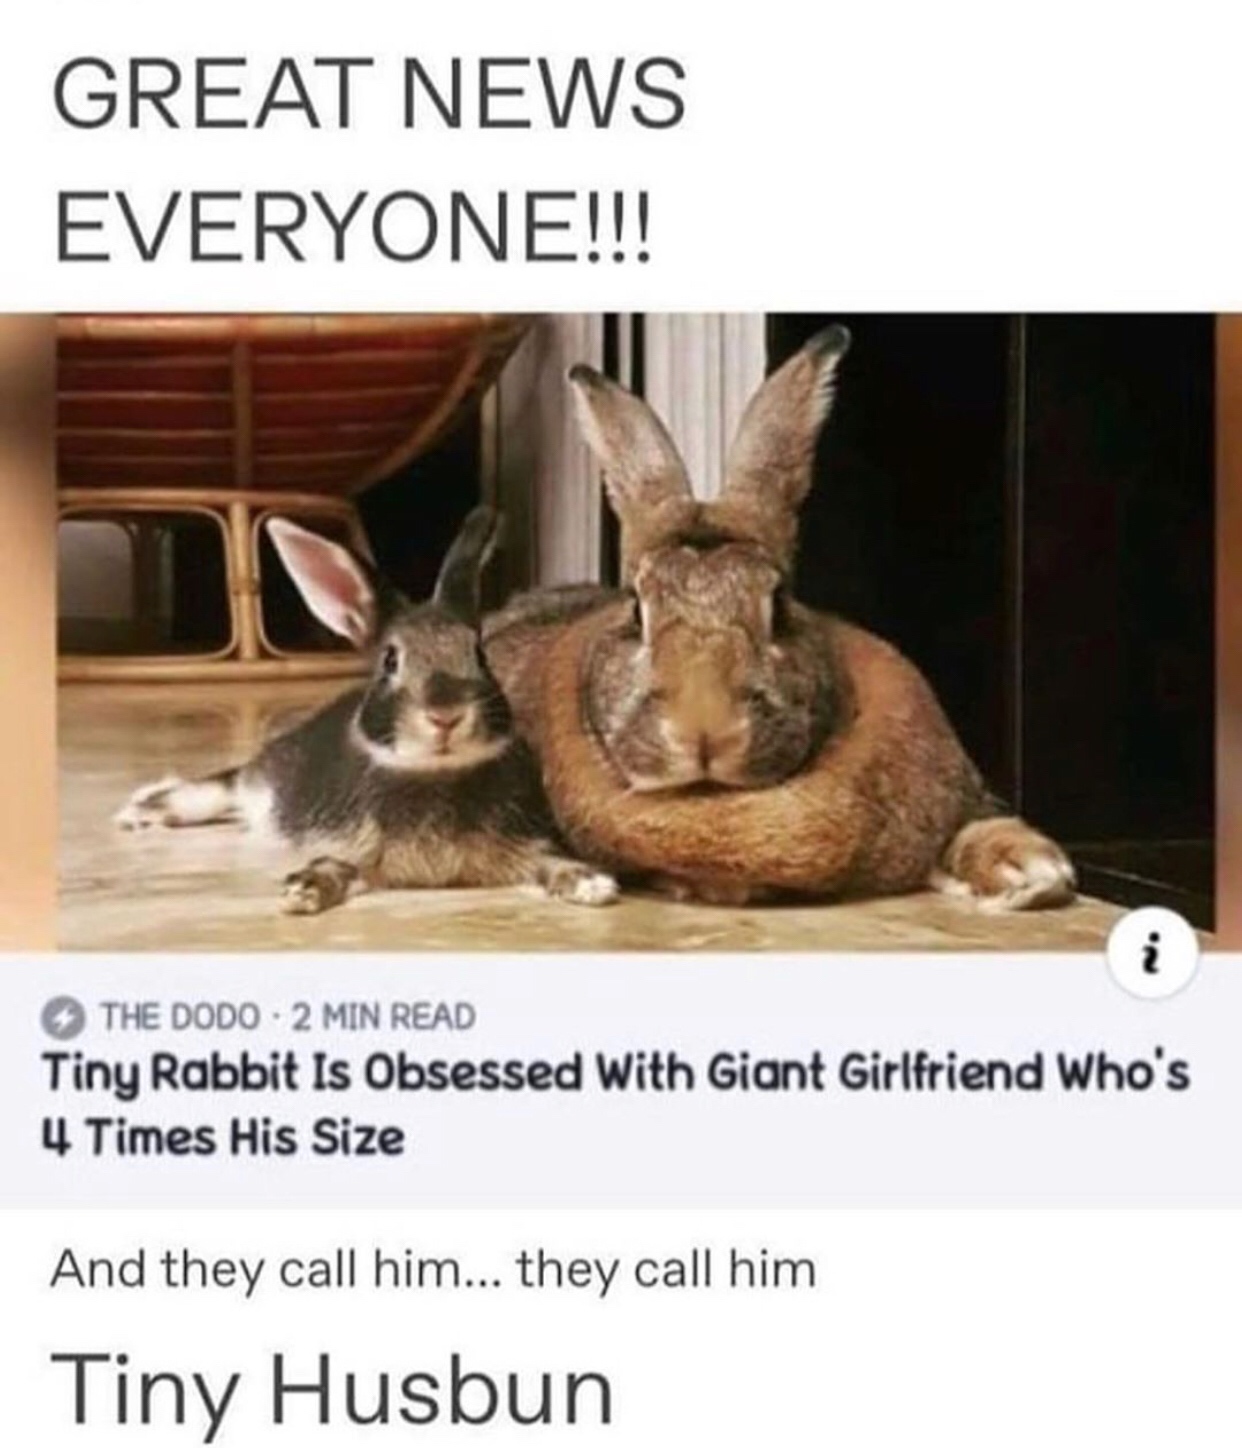 tiny rabbit giant girlfriend - Great News Everyone!!! The Dodo 2 Min Read Tiny Rabbit Is Obsessed With Giant Girlfriend Who's 4 Times His Size And they call him... they call him Tiny Husbun